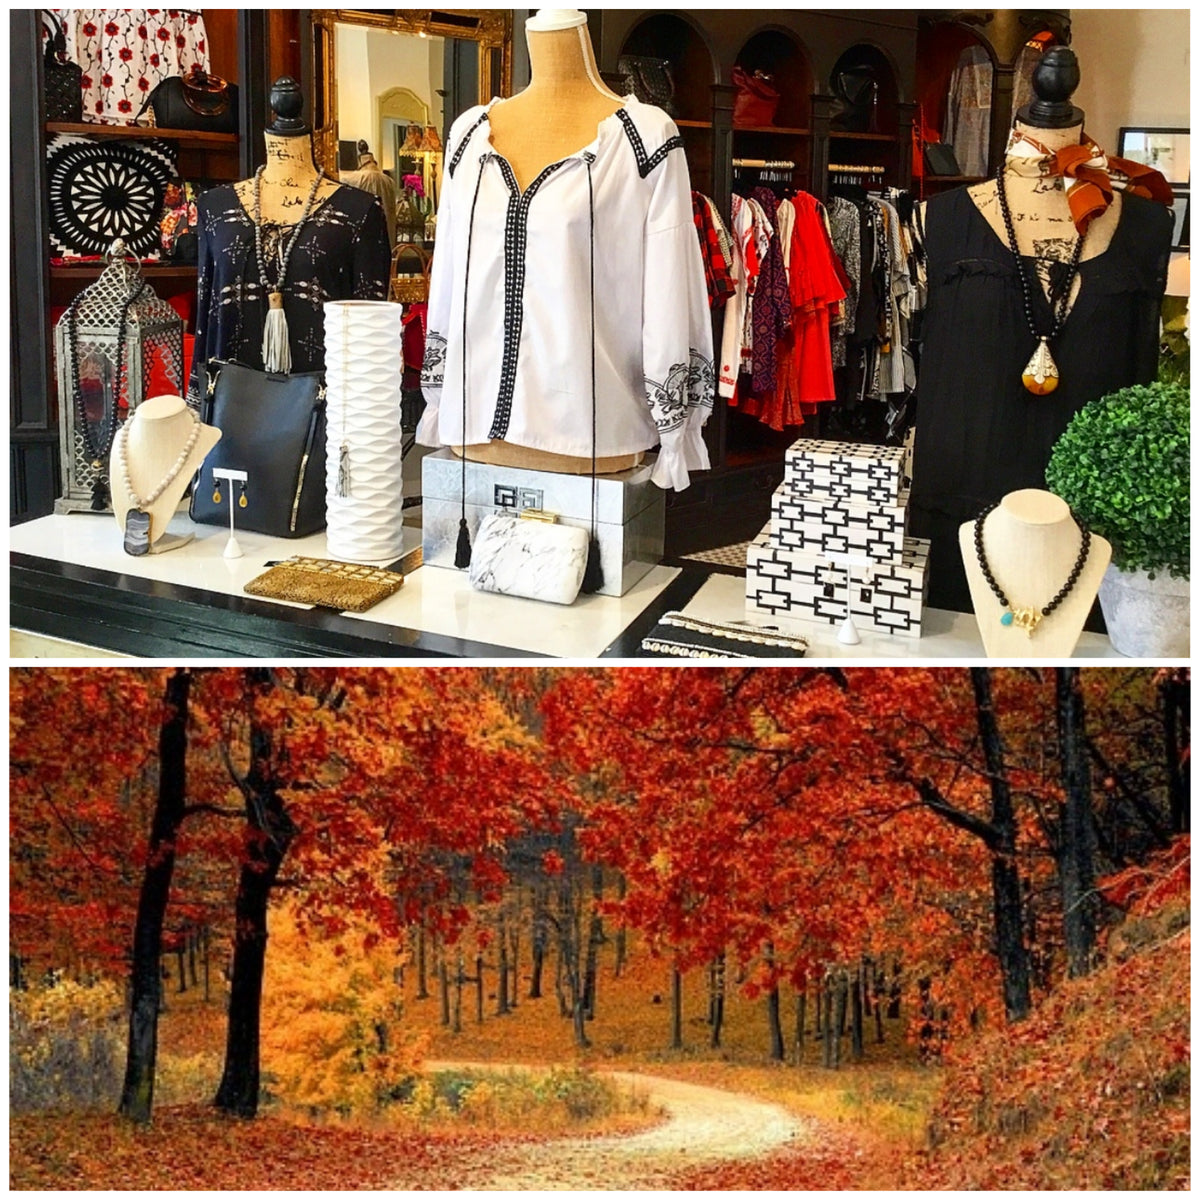 Celebrate October & Gear Up for Fall with New Arrivals and One-of-a-Kind Styles from Teramasu